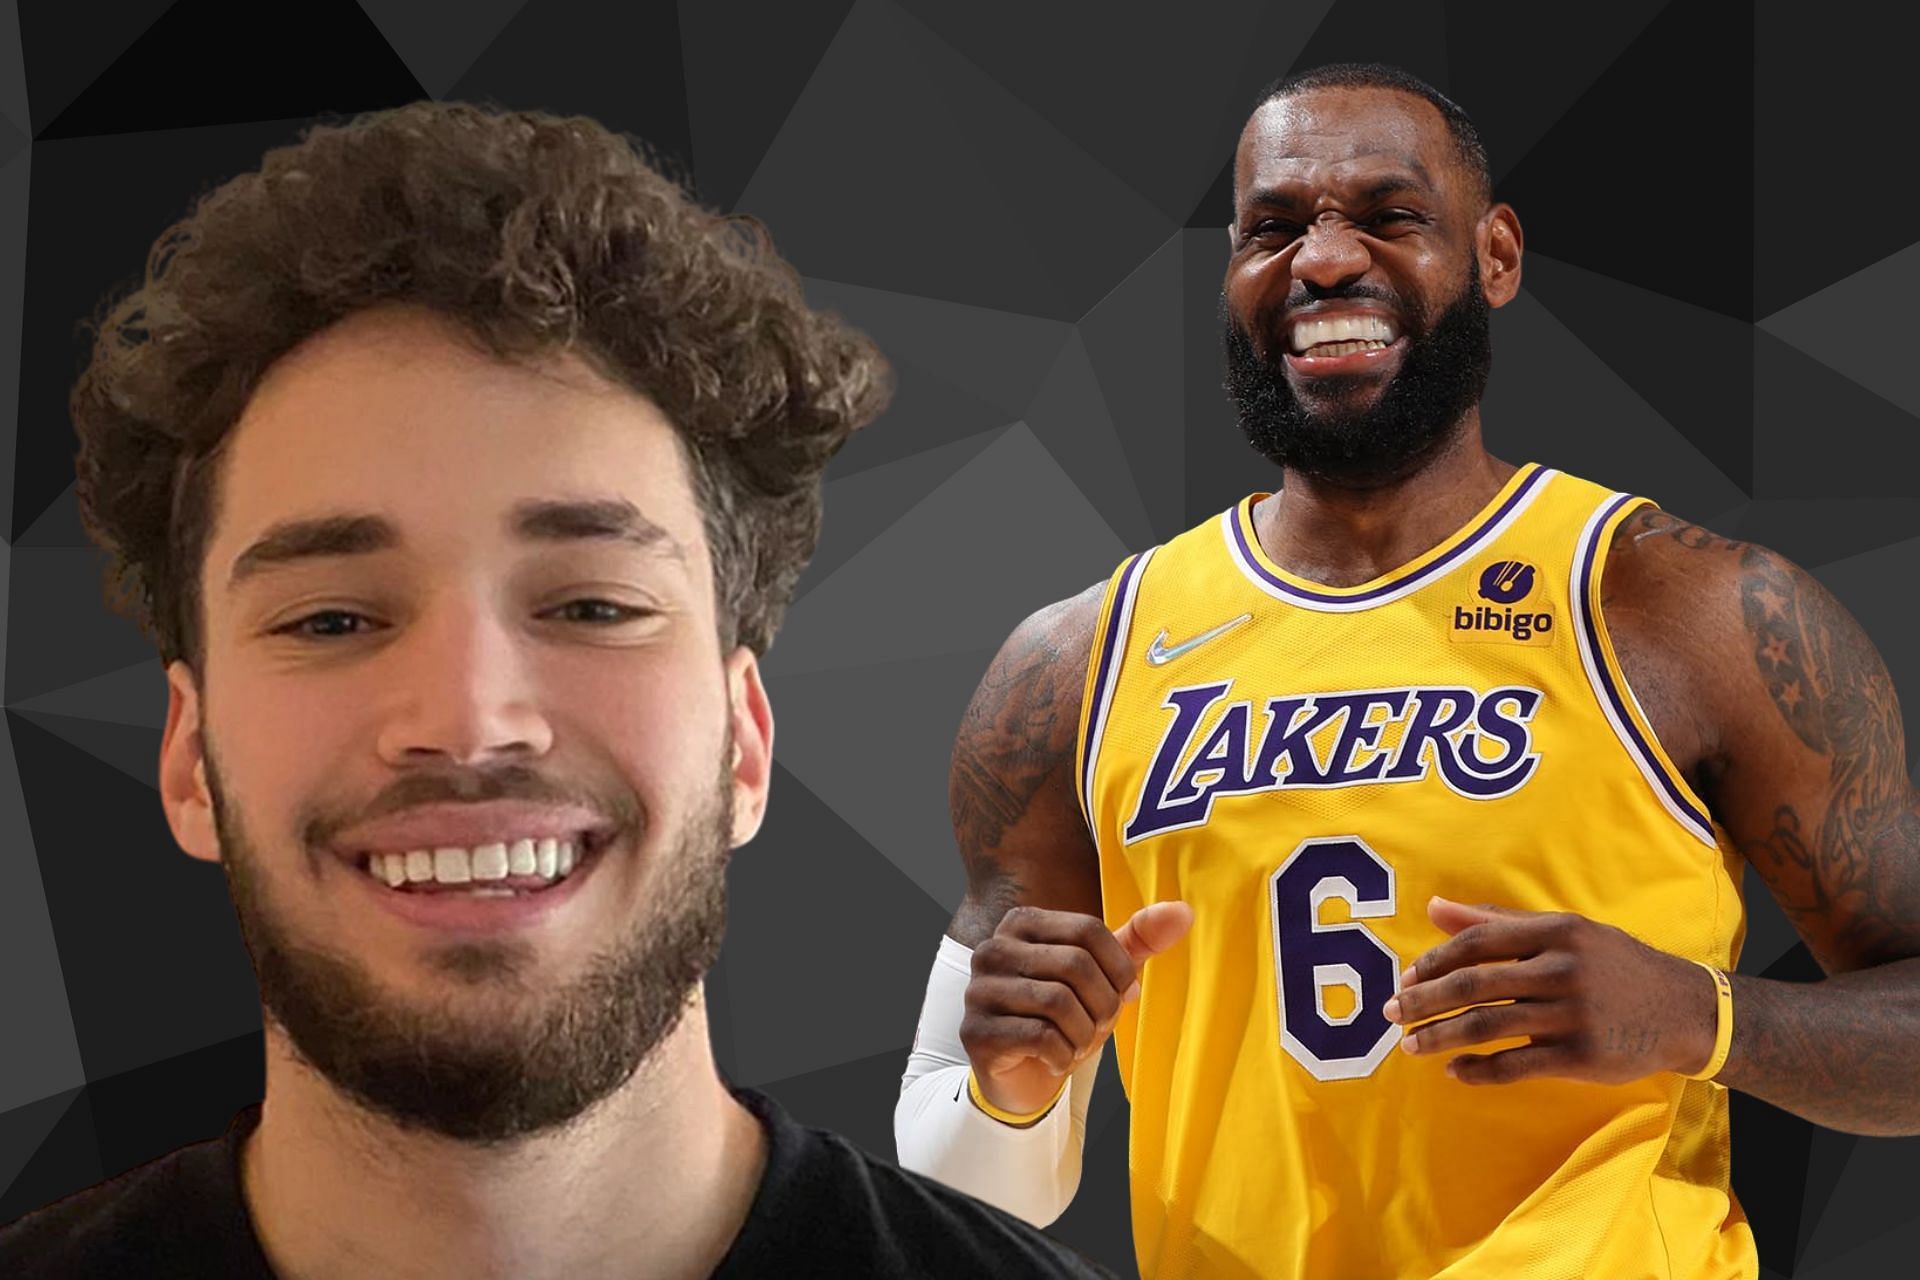 Adin Ross elated after being gifted a signed LeBron James kit (Image via Sportskeeda)